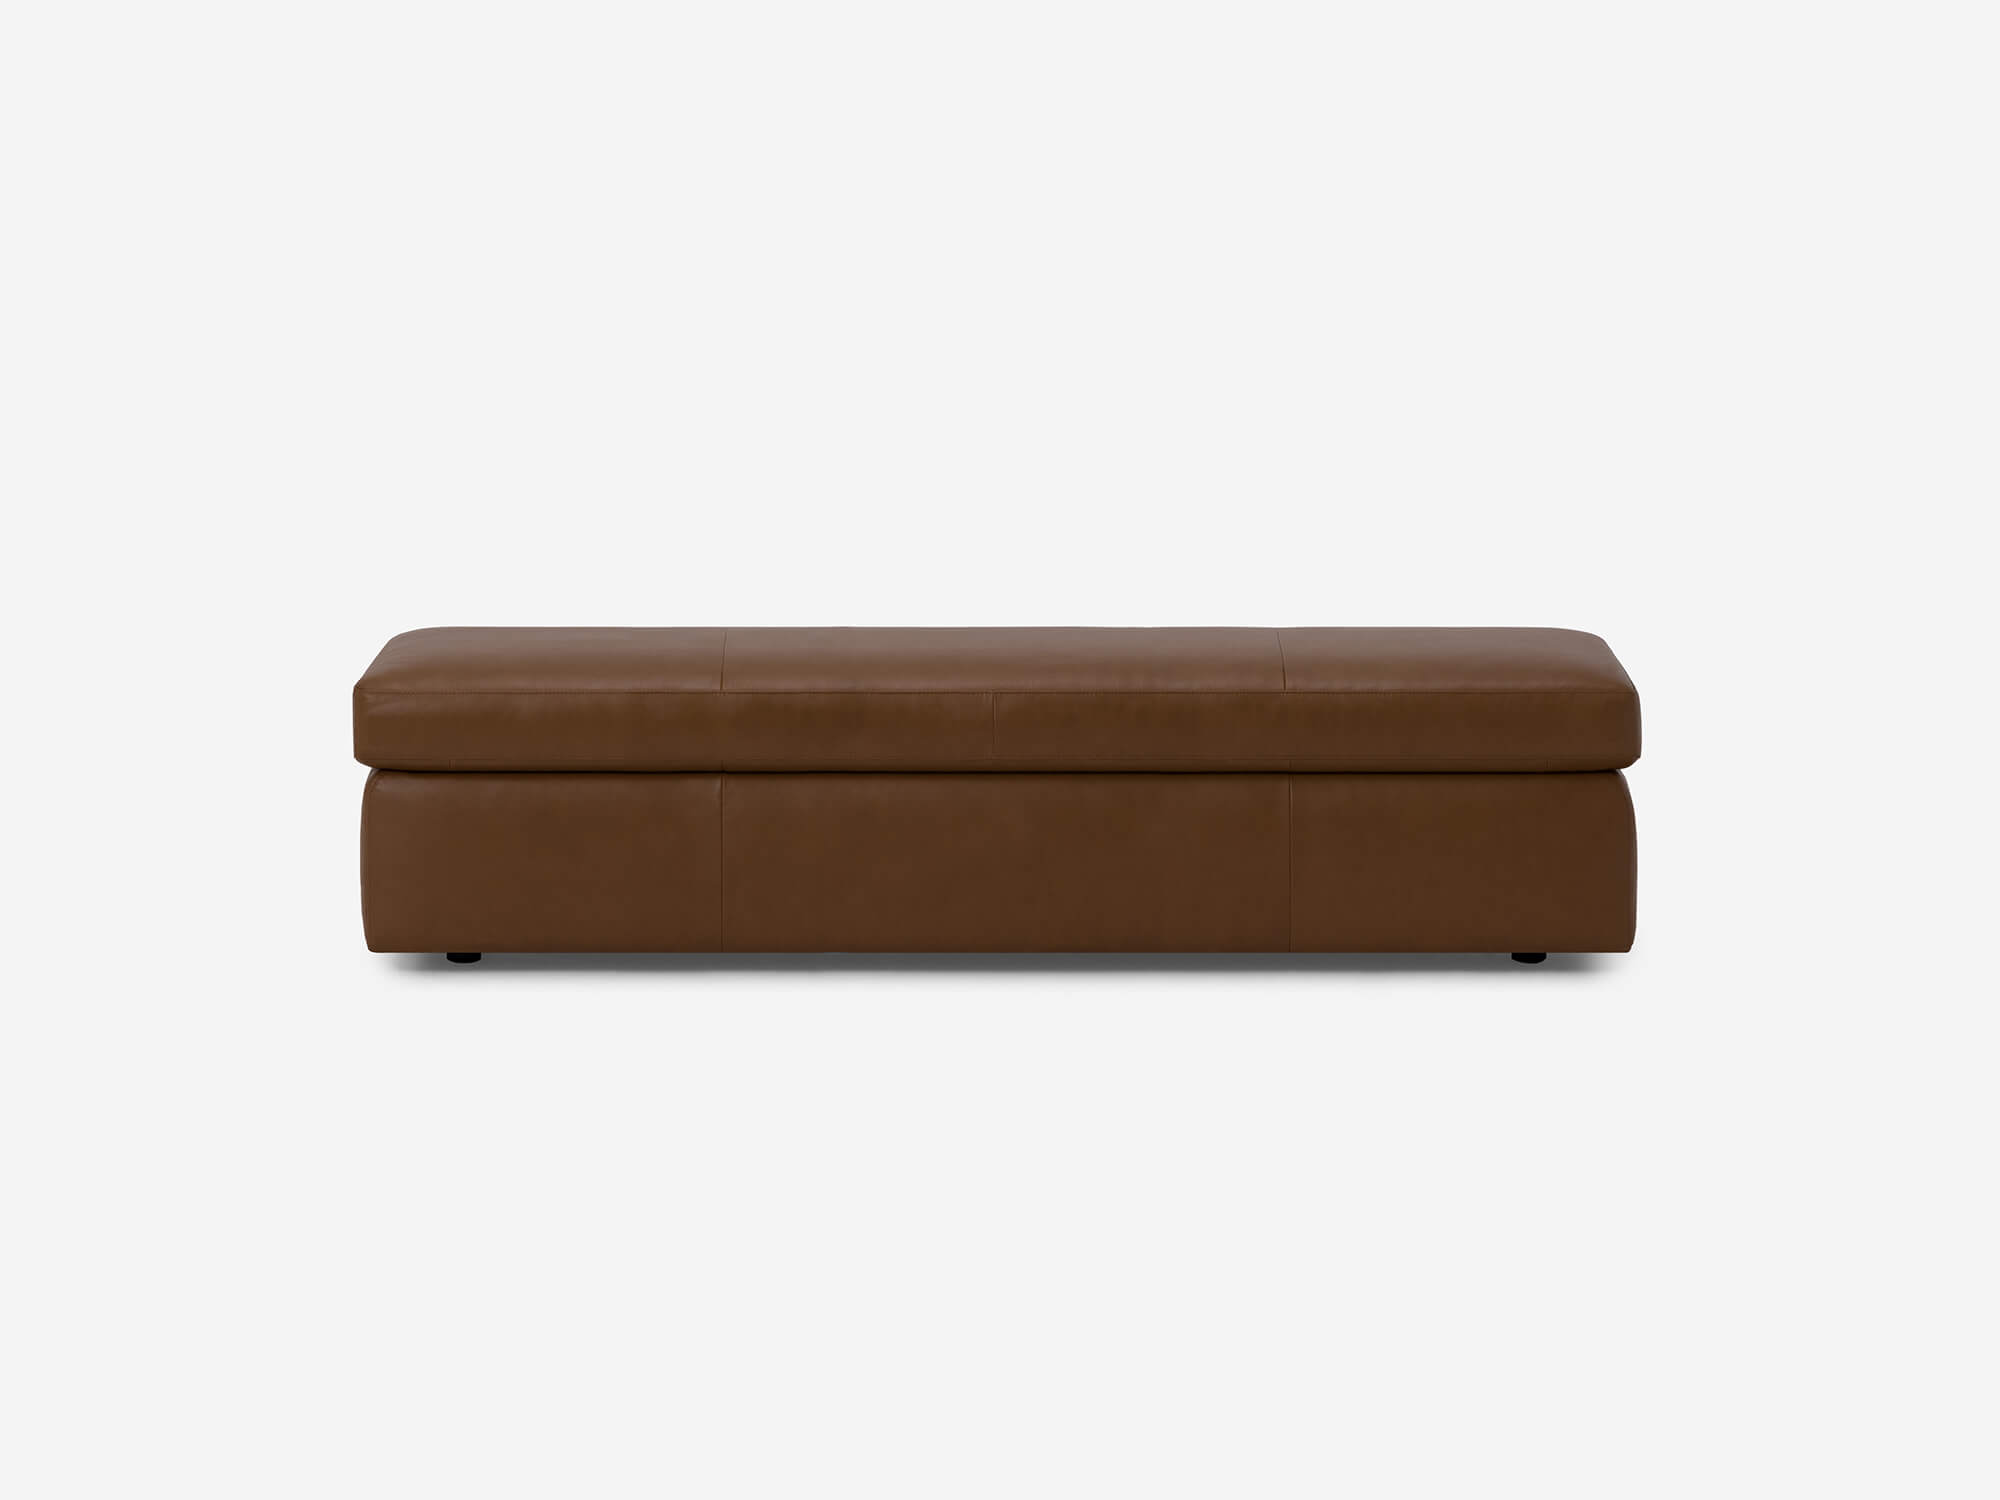 Cello Storage Bench Fabric Or, Brown Leather Ottoman Storage Bench